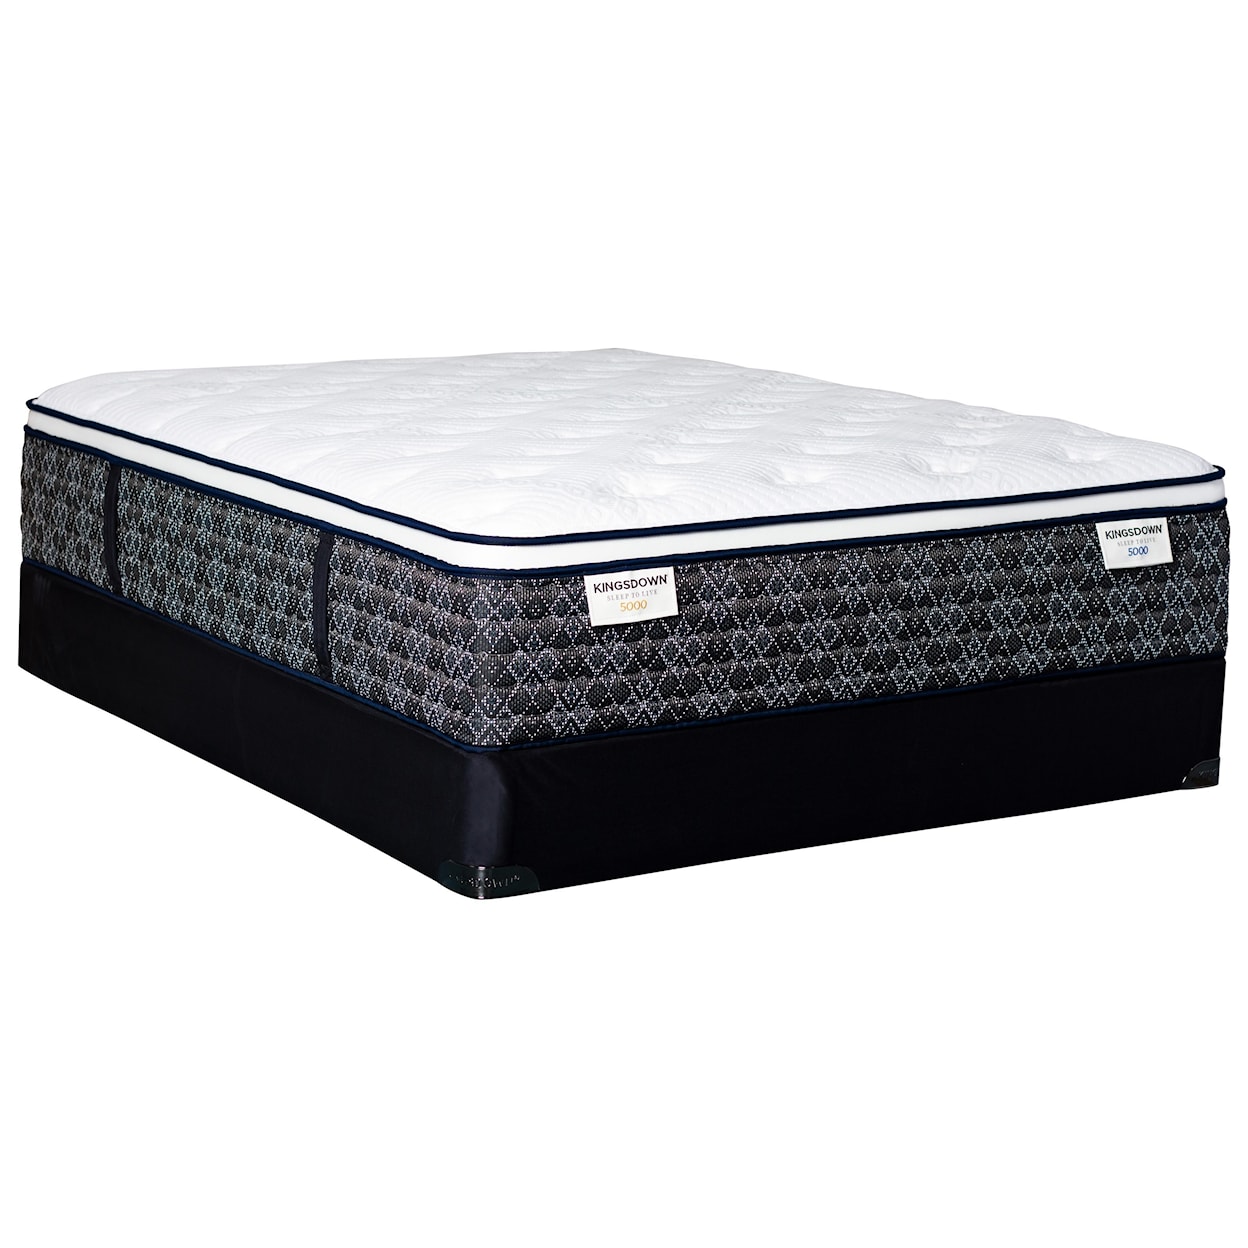 Kingsdown Sleep to Live 5000 Green Red ET Twin Pocketed Coil Mattress Set